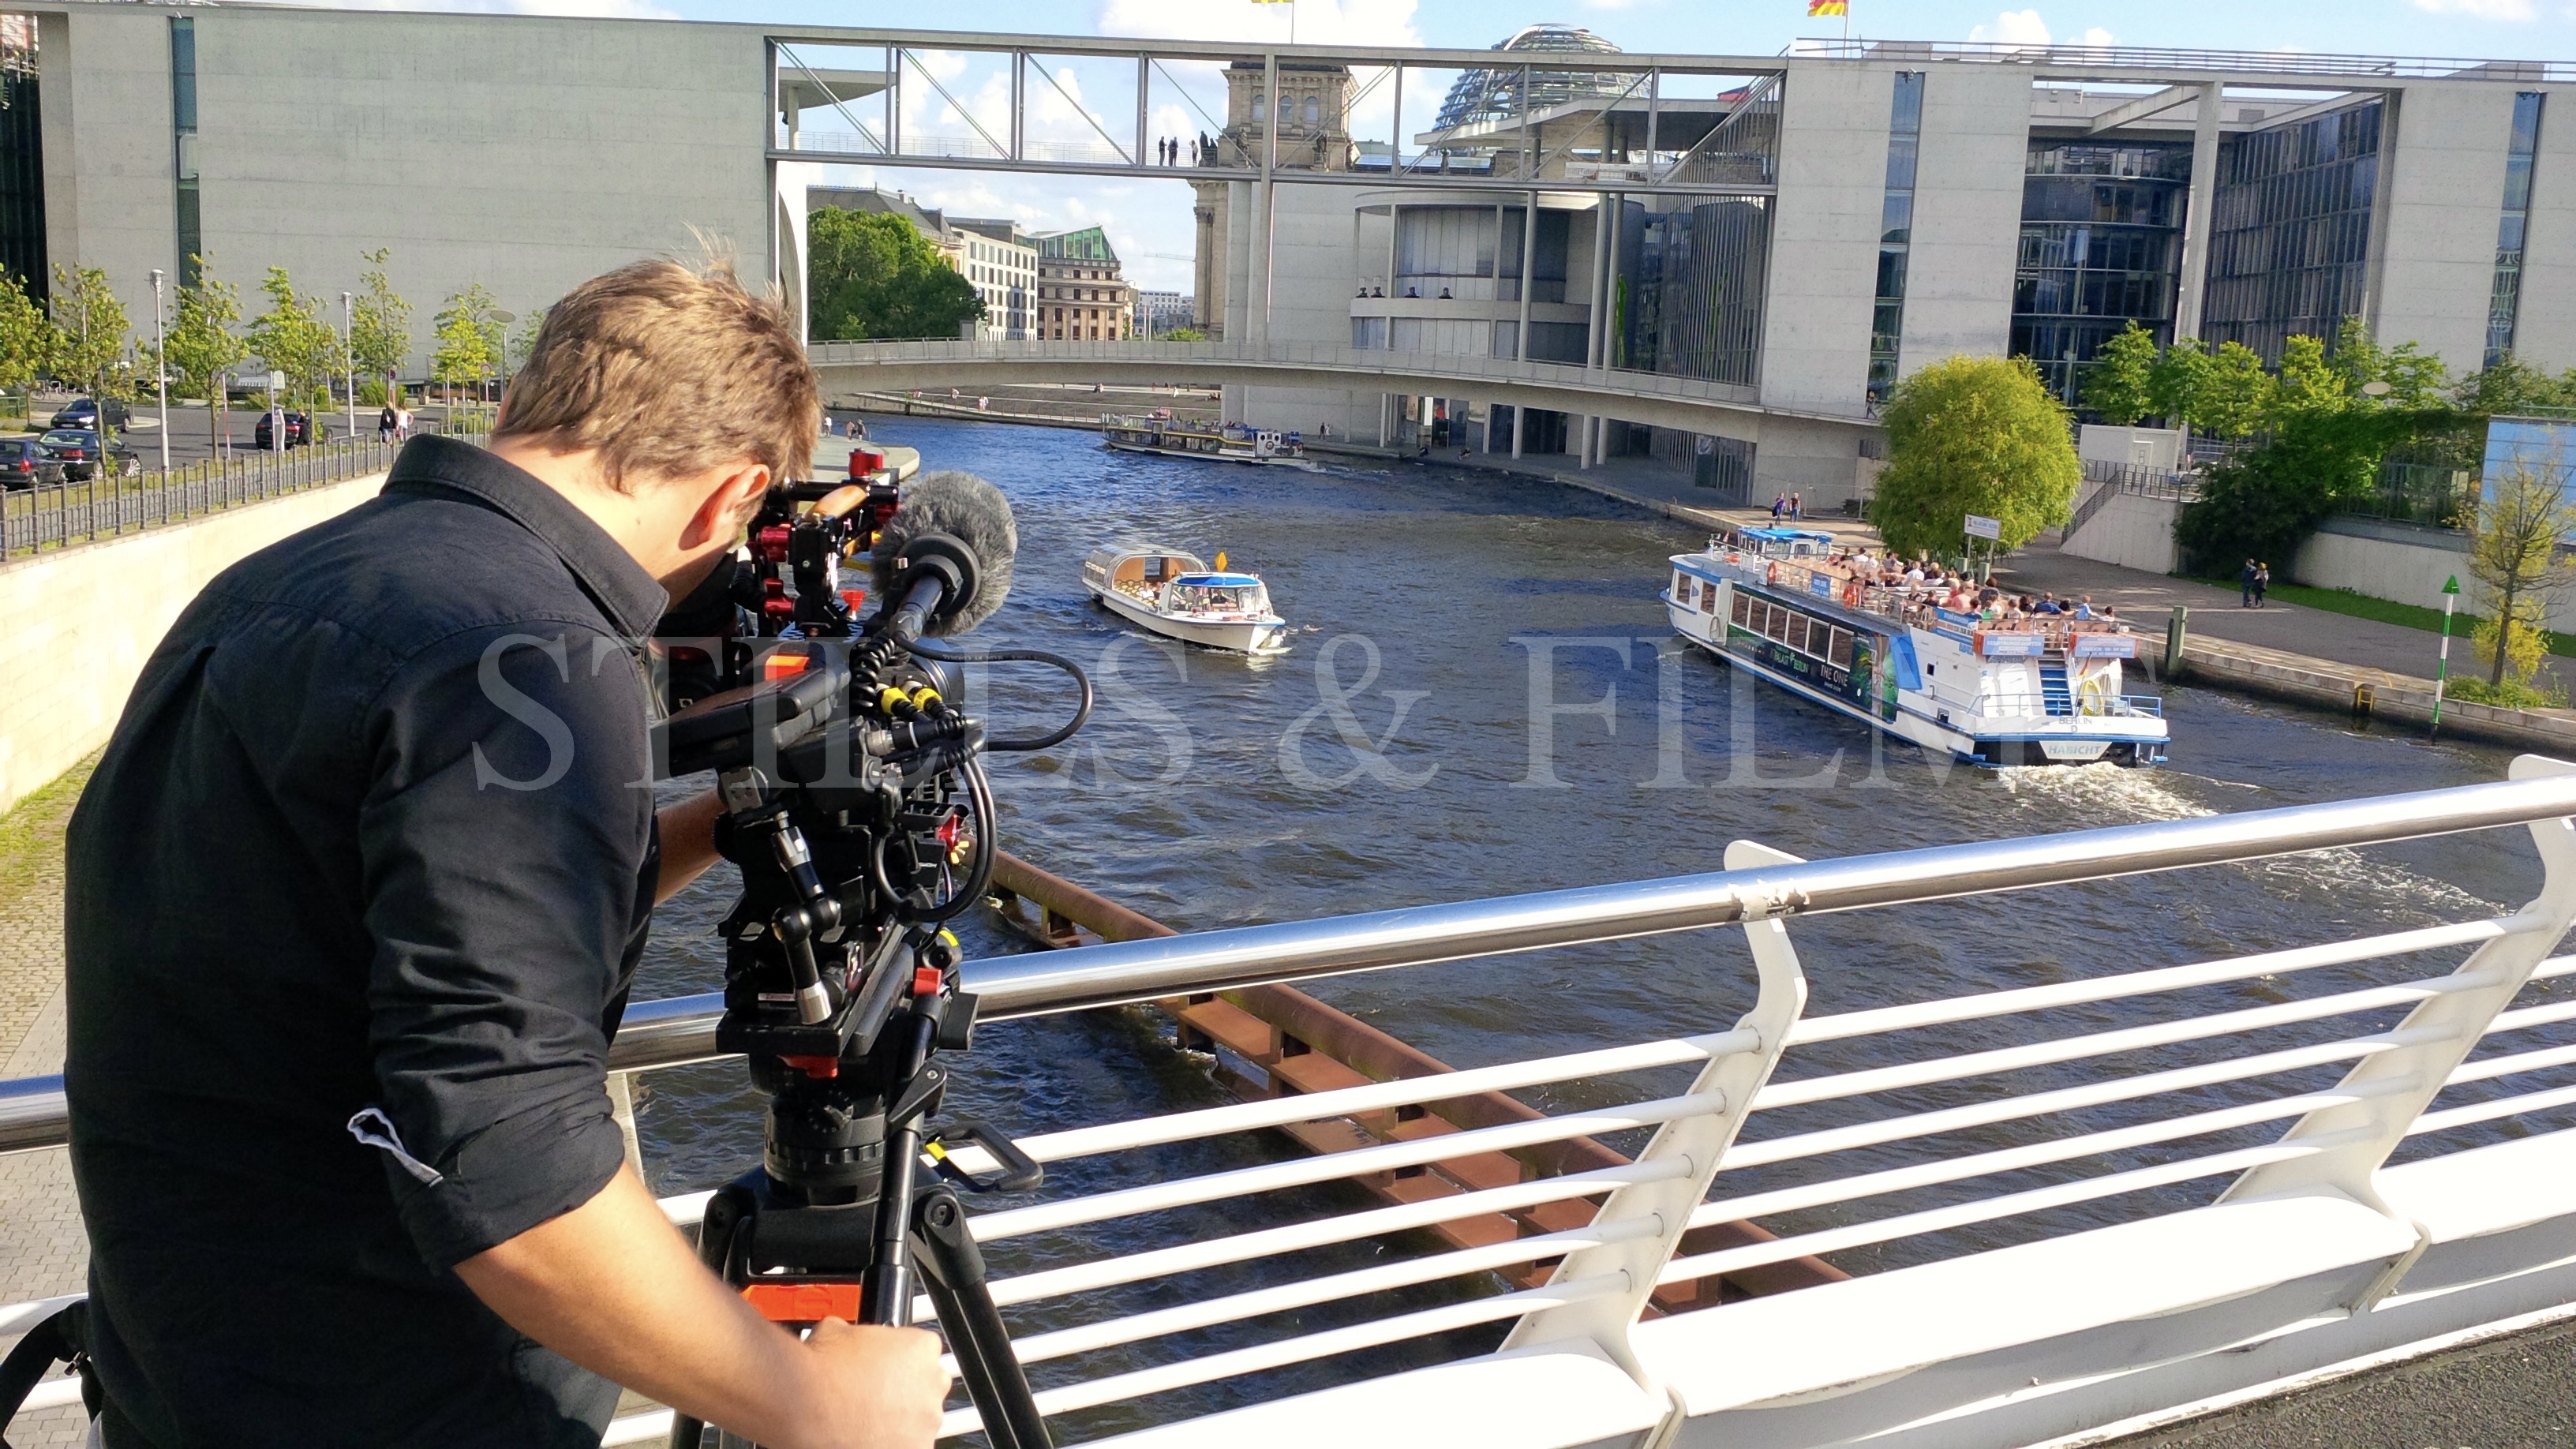 Our Berlin cameraman films b-roll for a US client in the center of Berlin